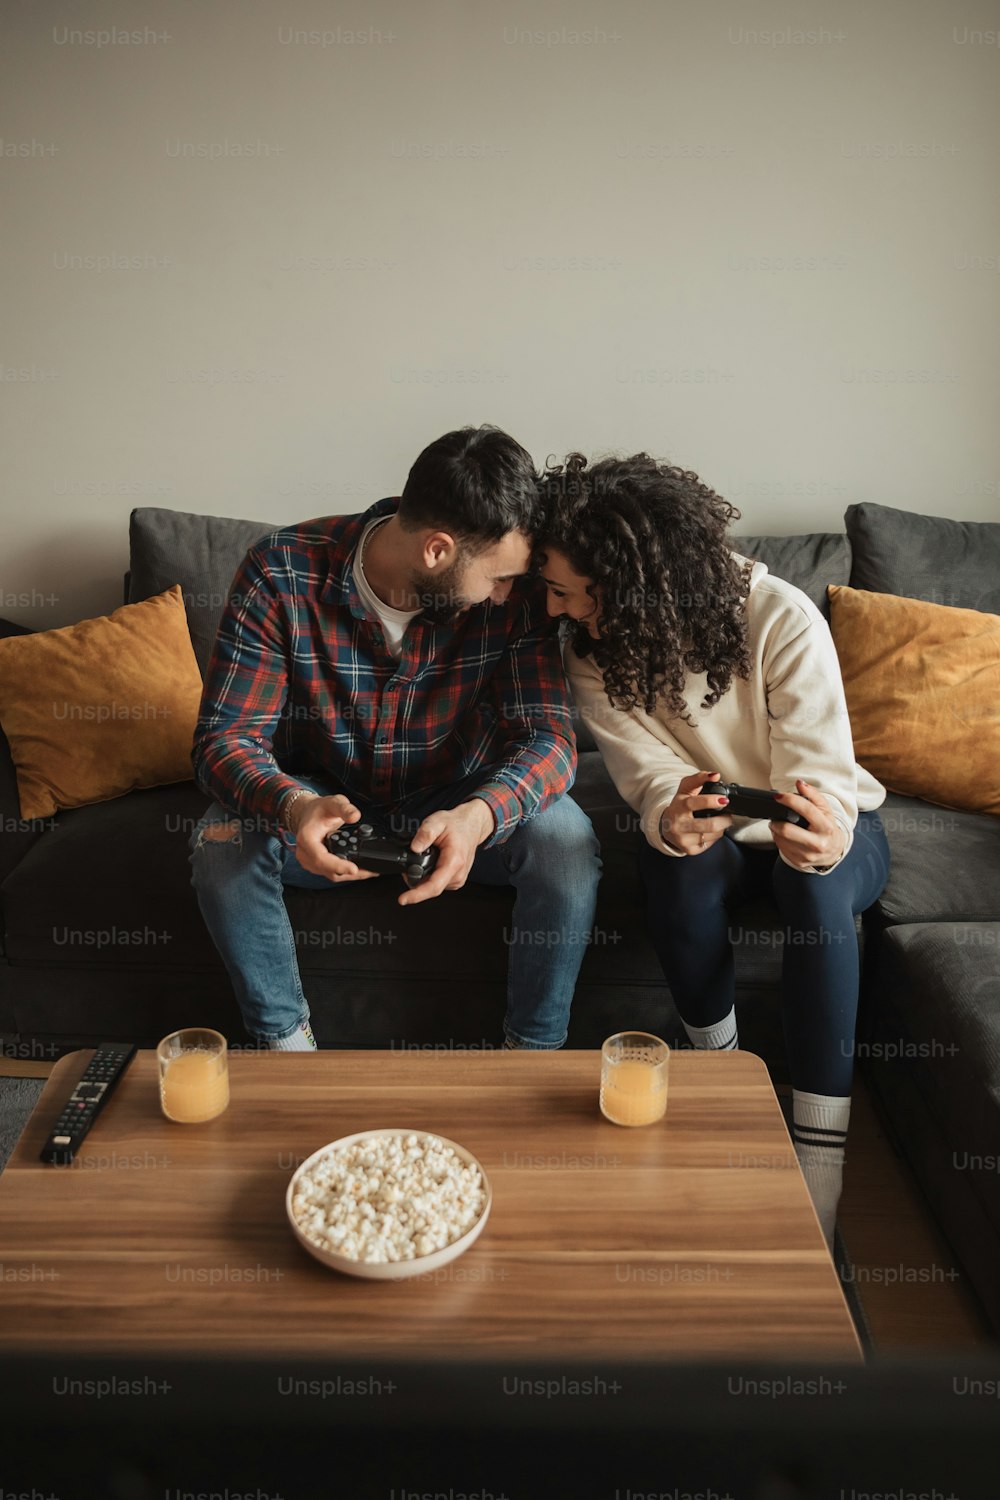 a man and woman sitting on a couch looking at a cell phone